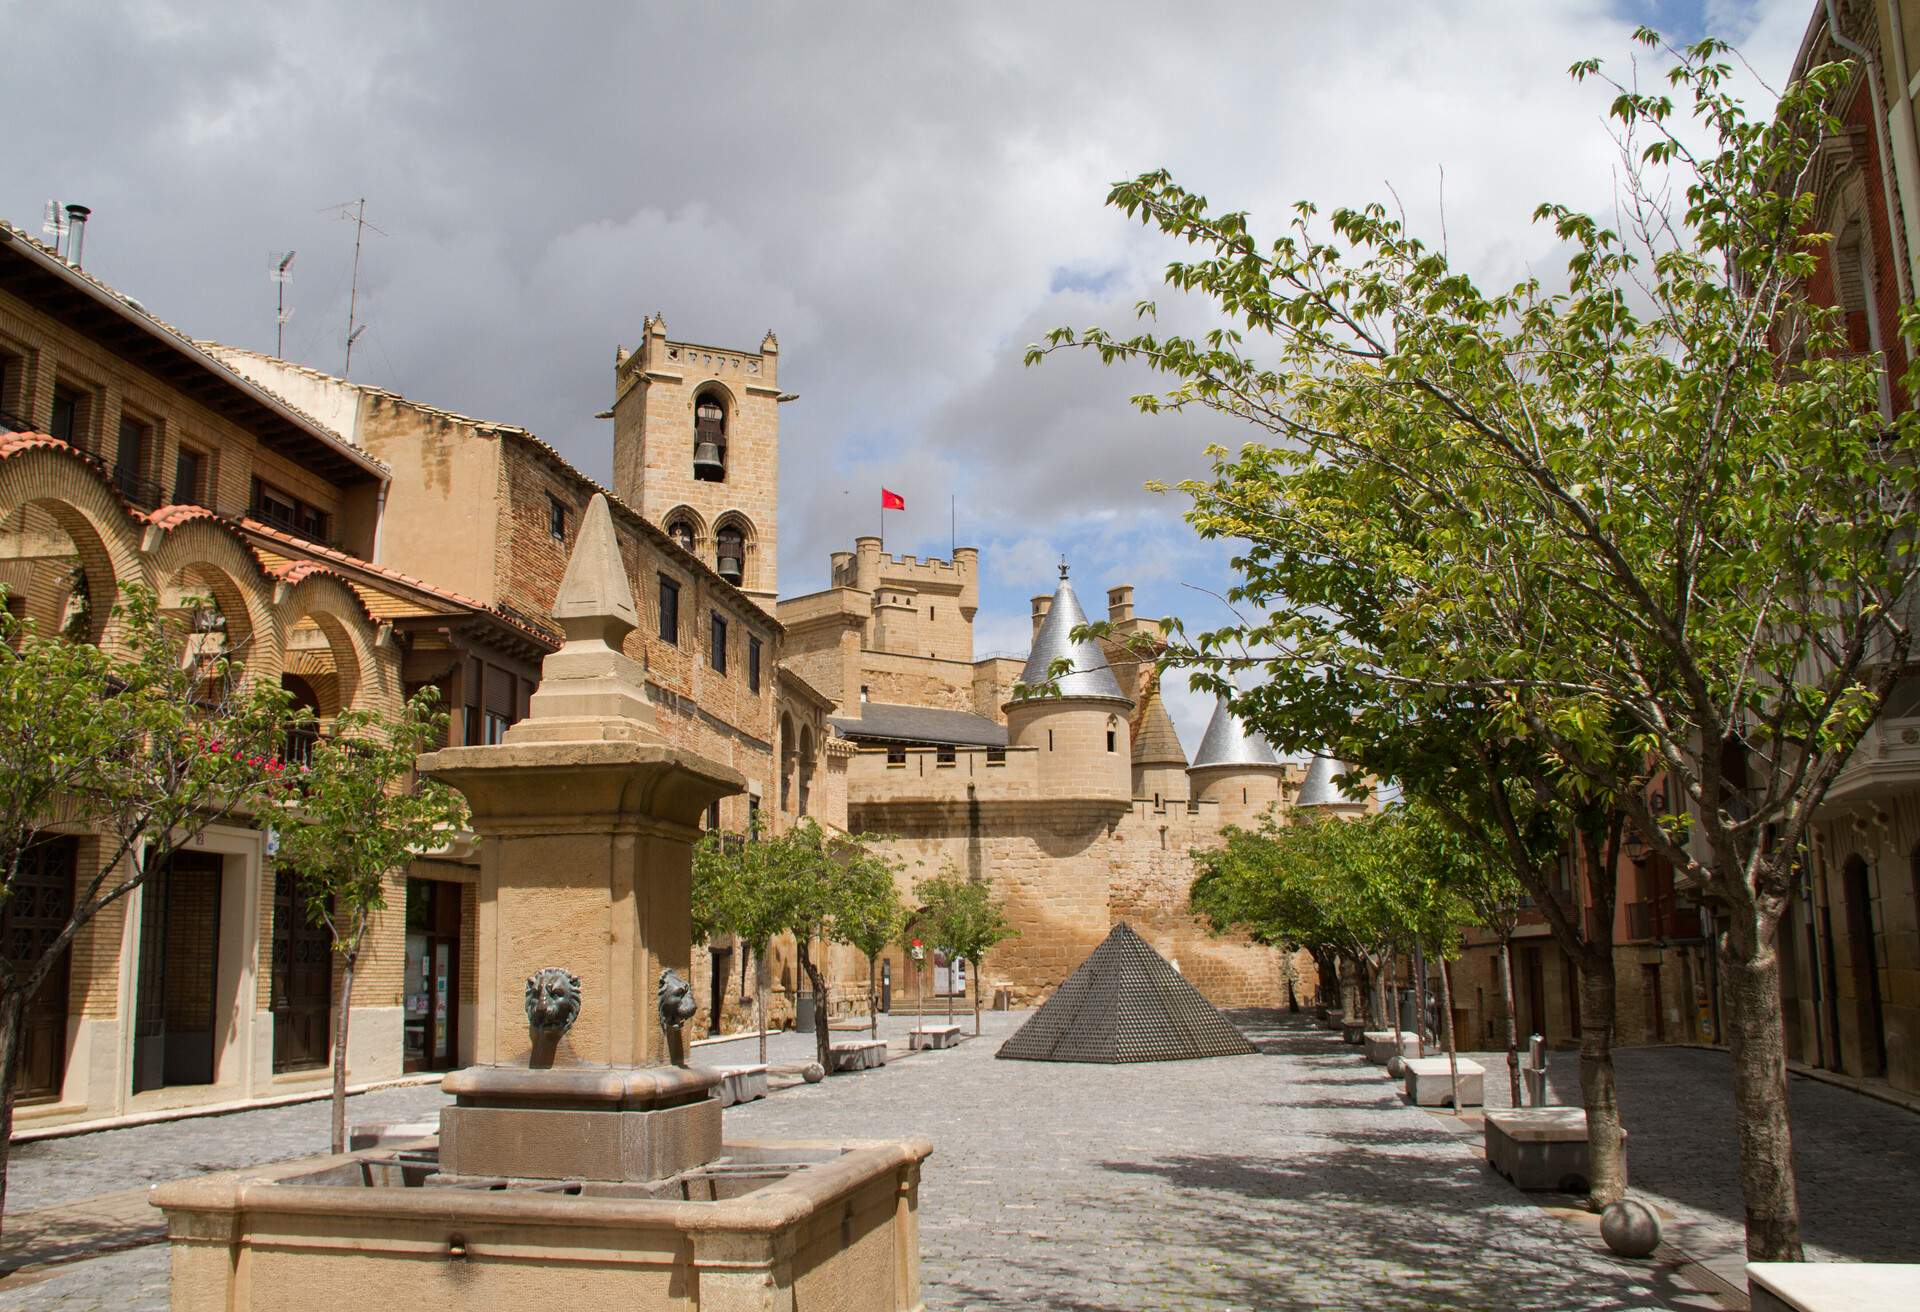 Plaza of Carlos III with the Royal Palace in the background Olite,Spain